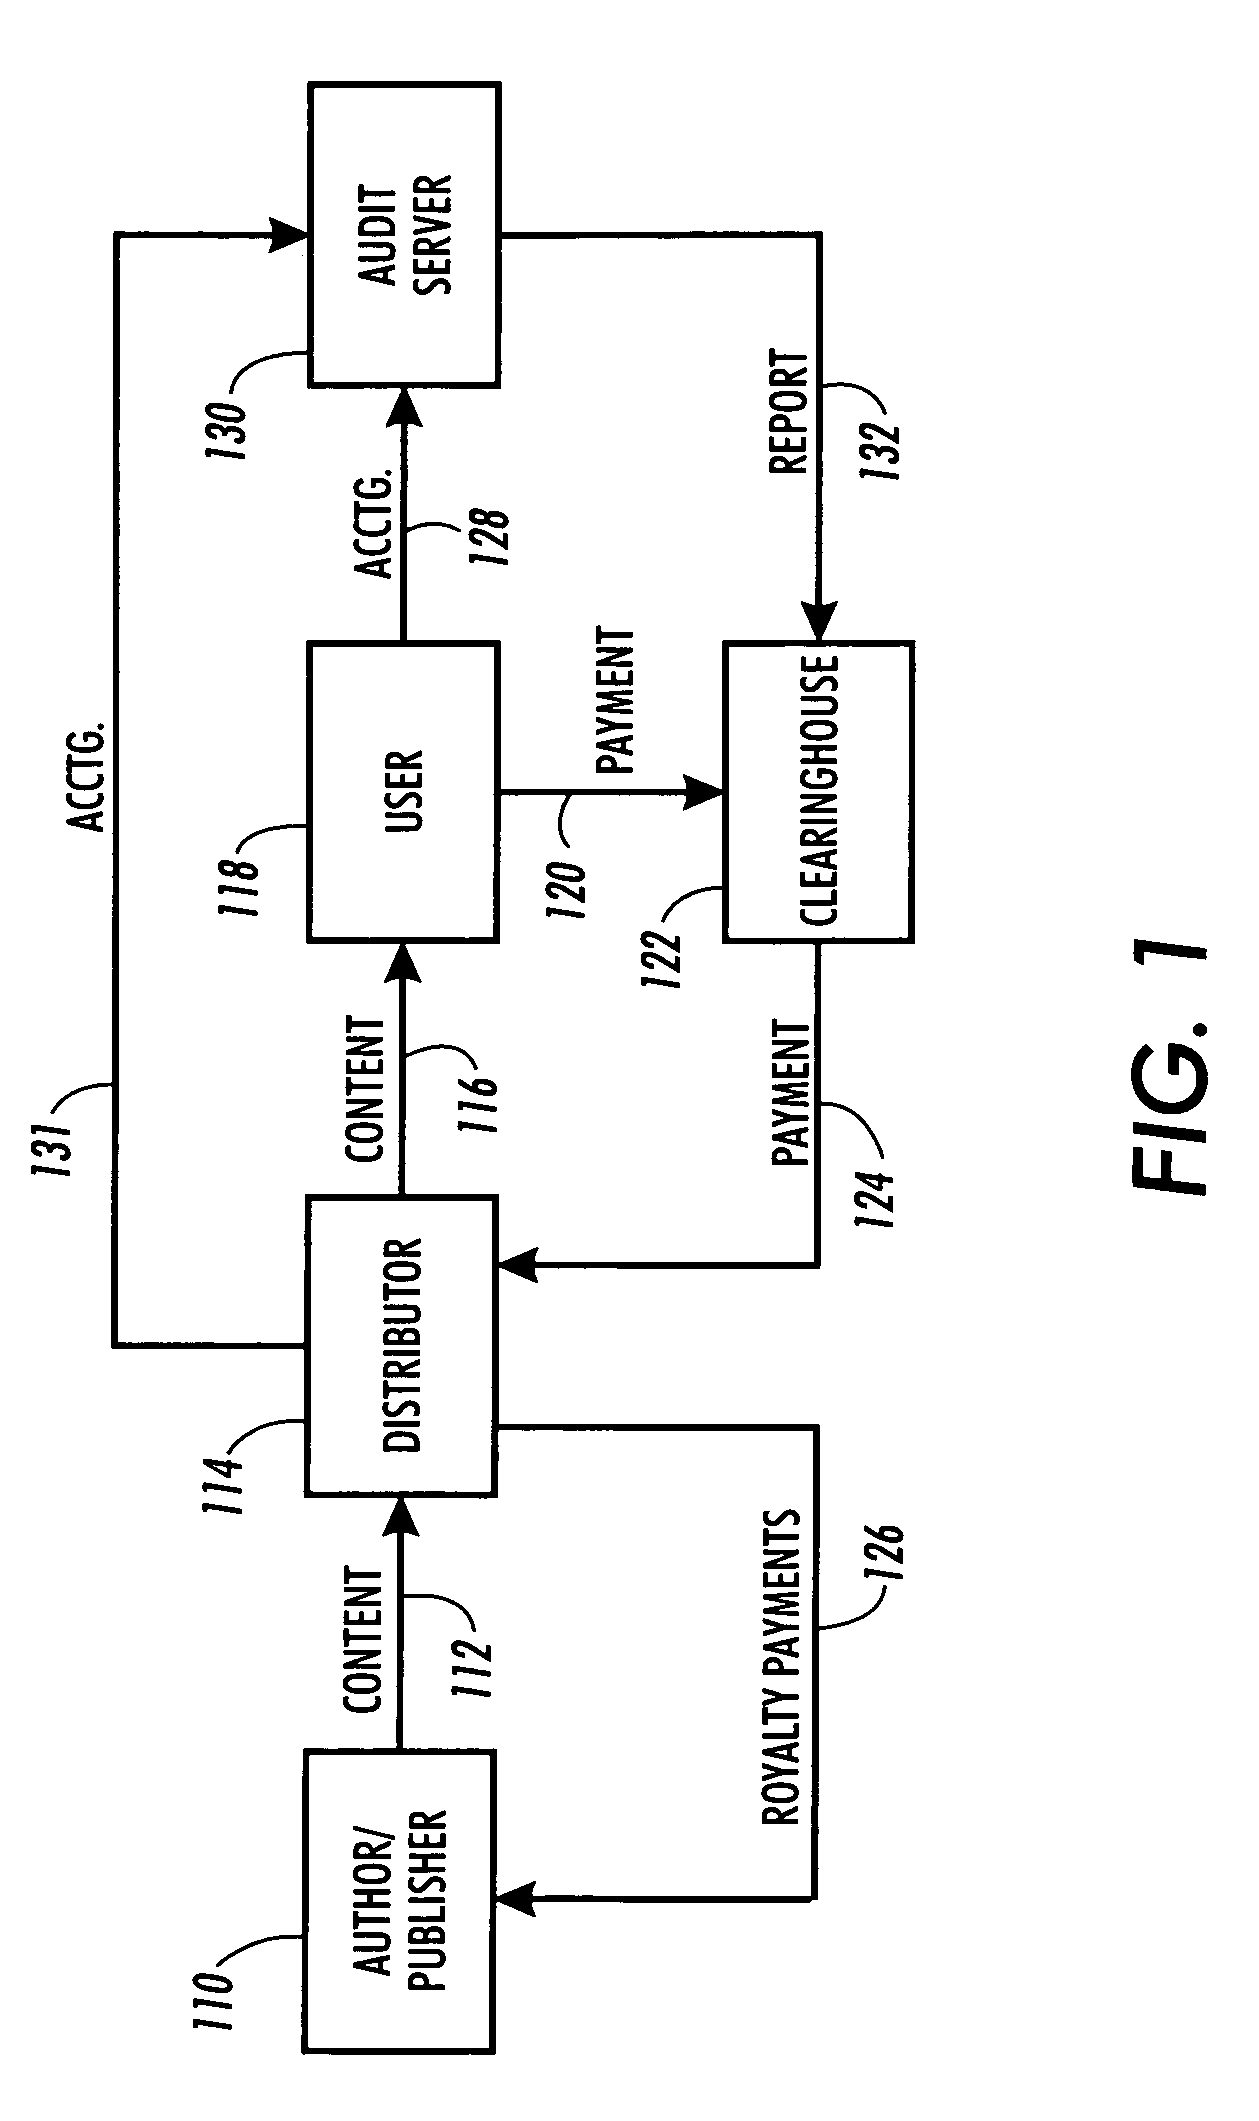 System and method for transferring the right to decode messages